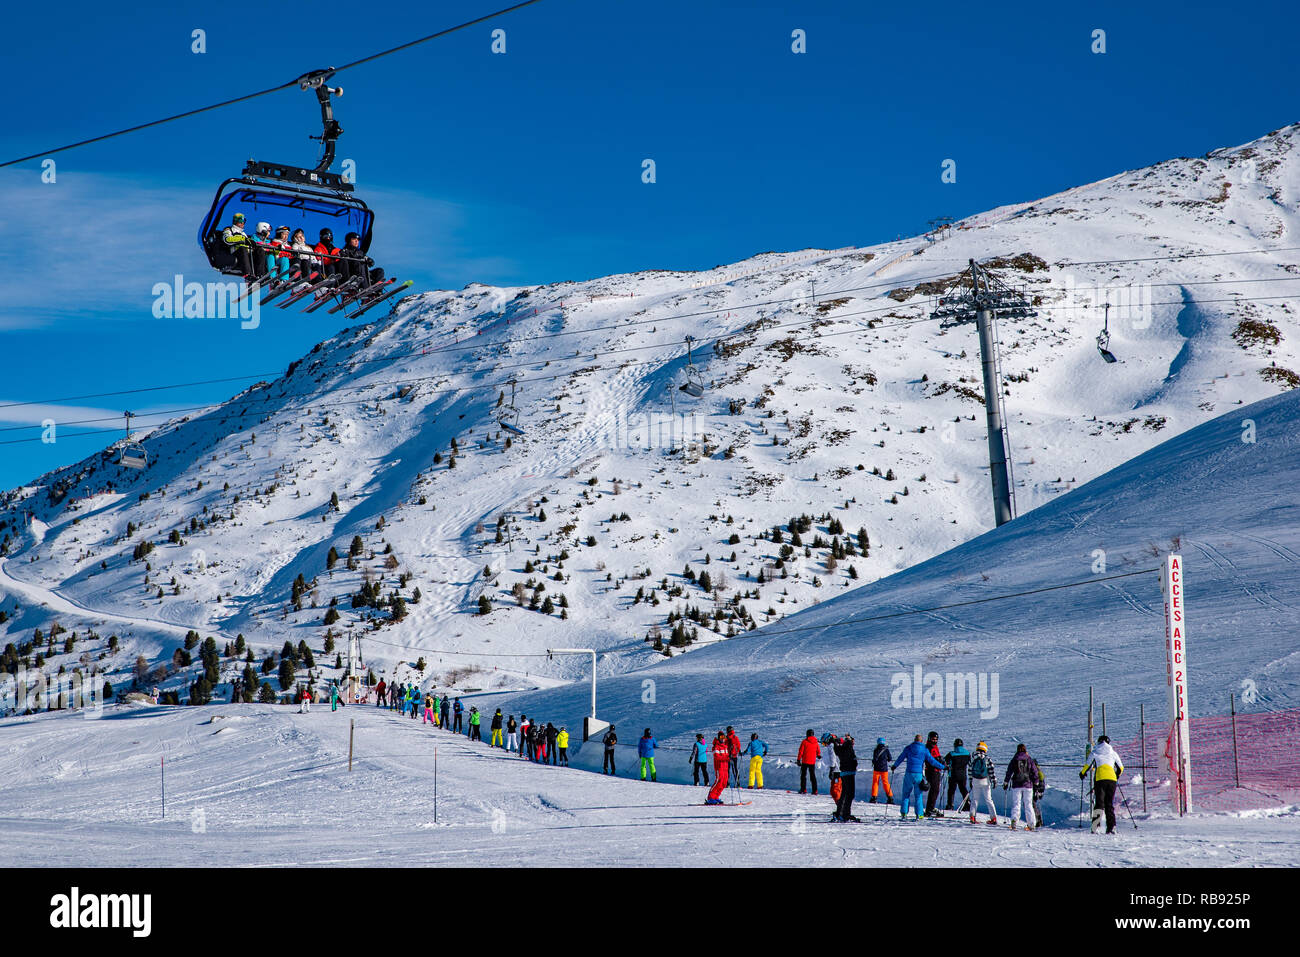 Ski lifts for ski and snowboard players for winter holiday in Alps area, Les Arcs 2000, Savoie, France, Europe Stock Photo